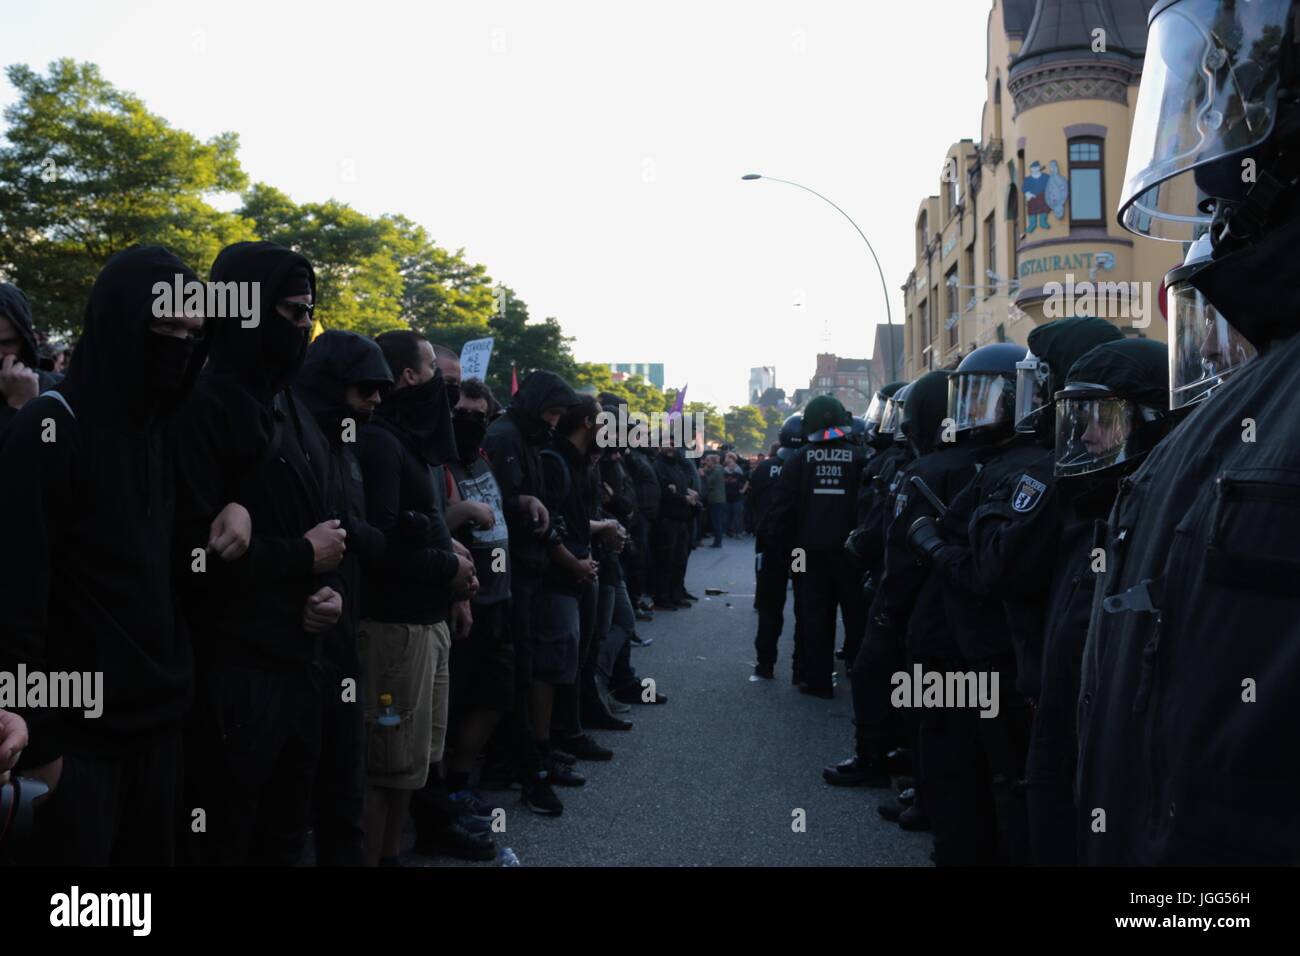 Hamburg, Germany. 6th July, 2017. Bloc bloc protesters engage in a tense stand off with riot police ahead of the g20 summit in Hamburg Credit: Conall Kearney/Alamy Live News Stock Photo